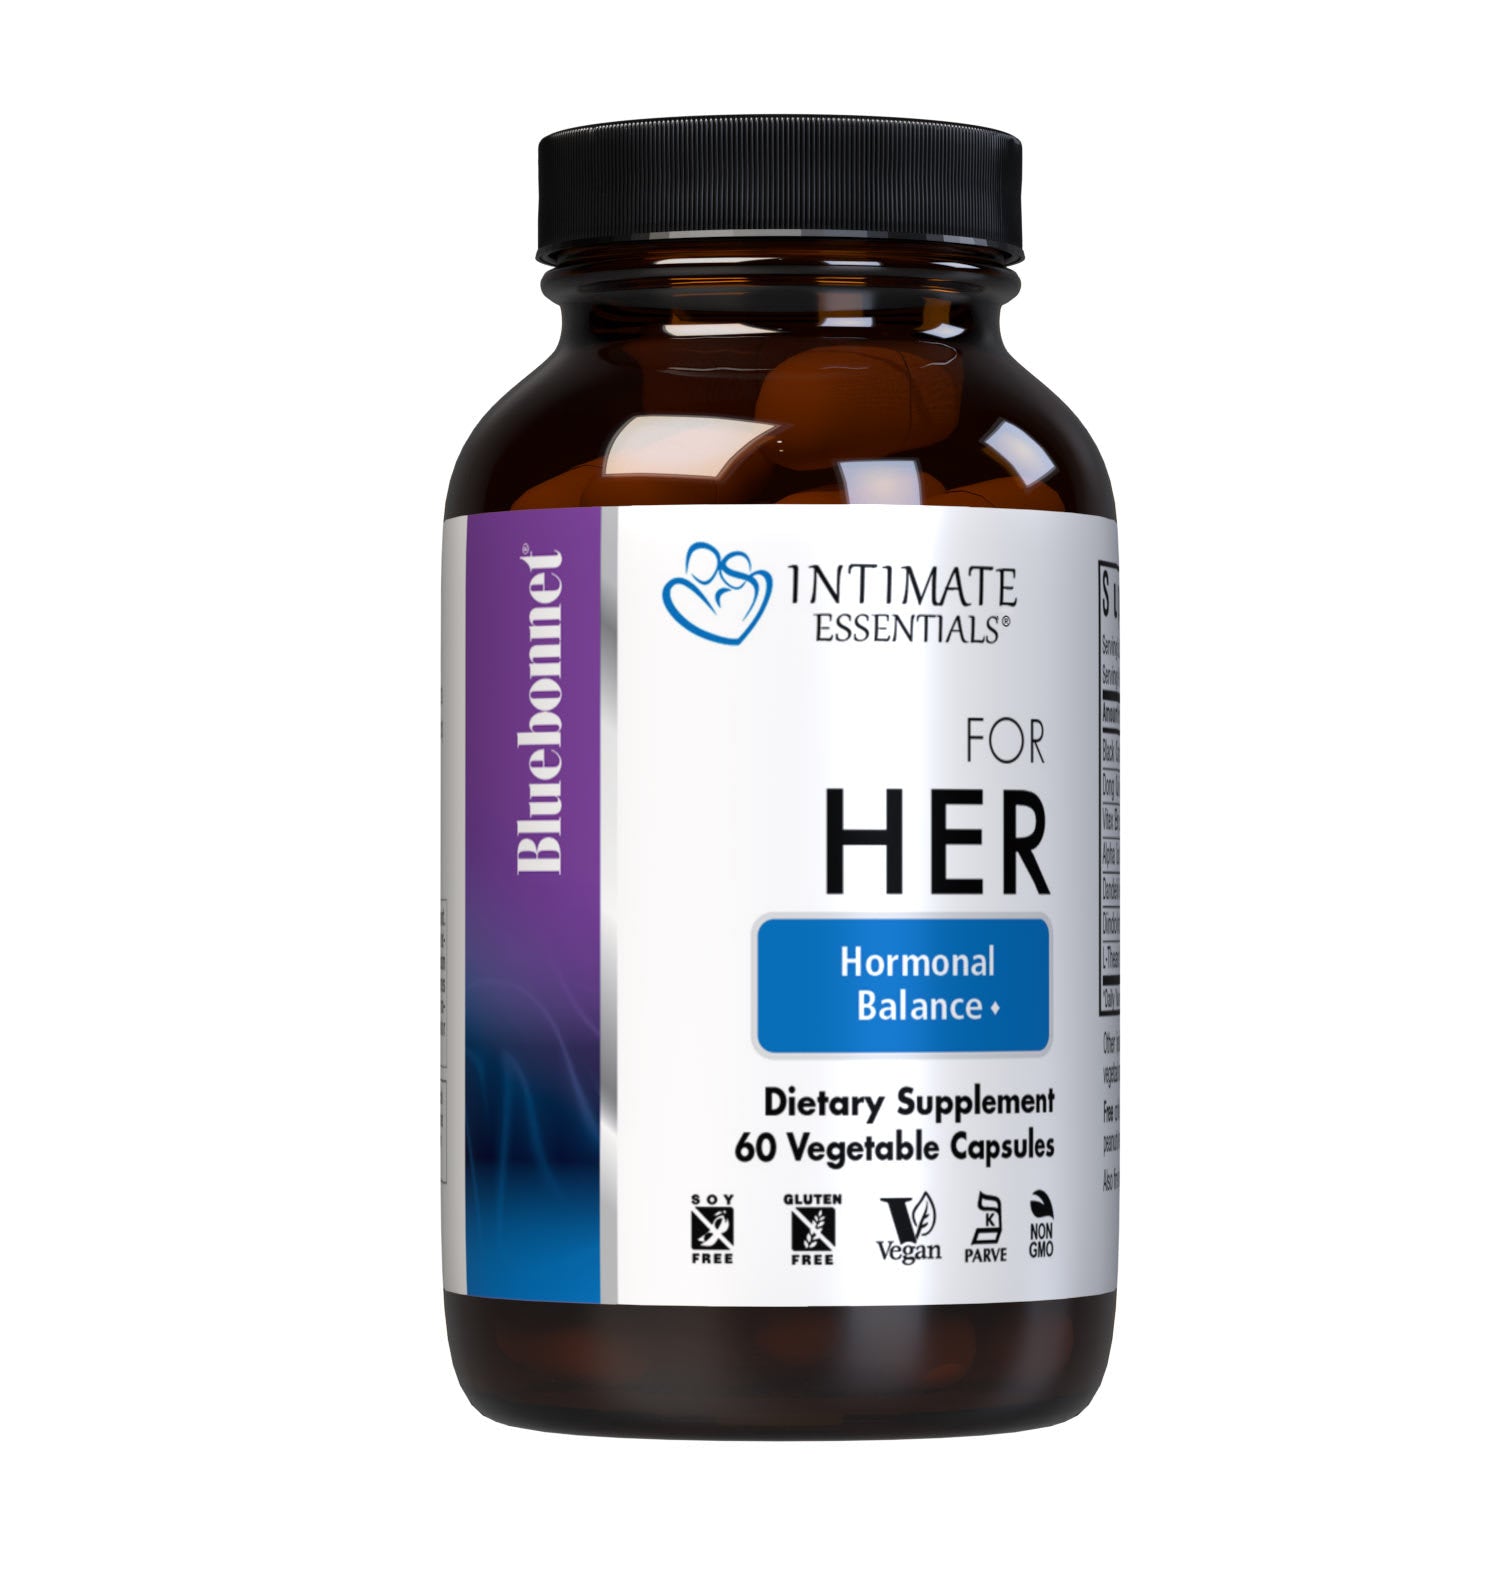 INTIMATE ESSENTIALS FOR HER HORMONAL BALANCE♢